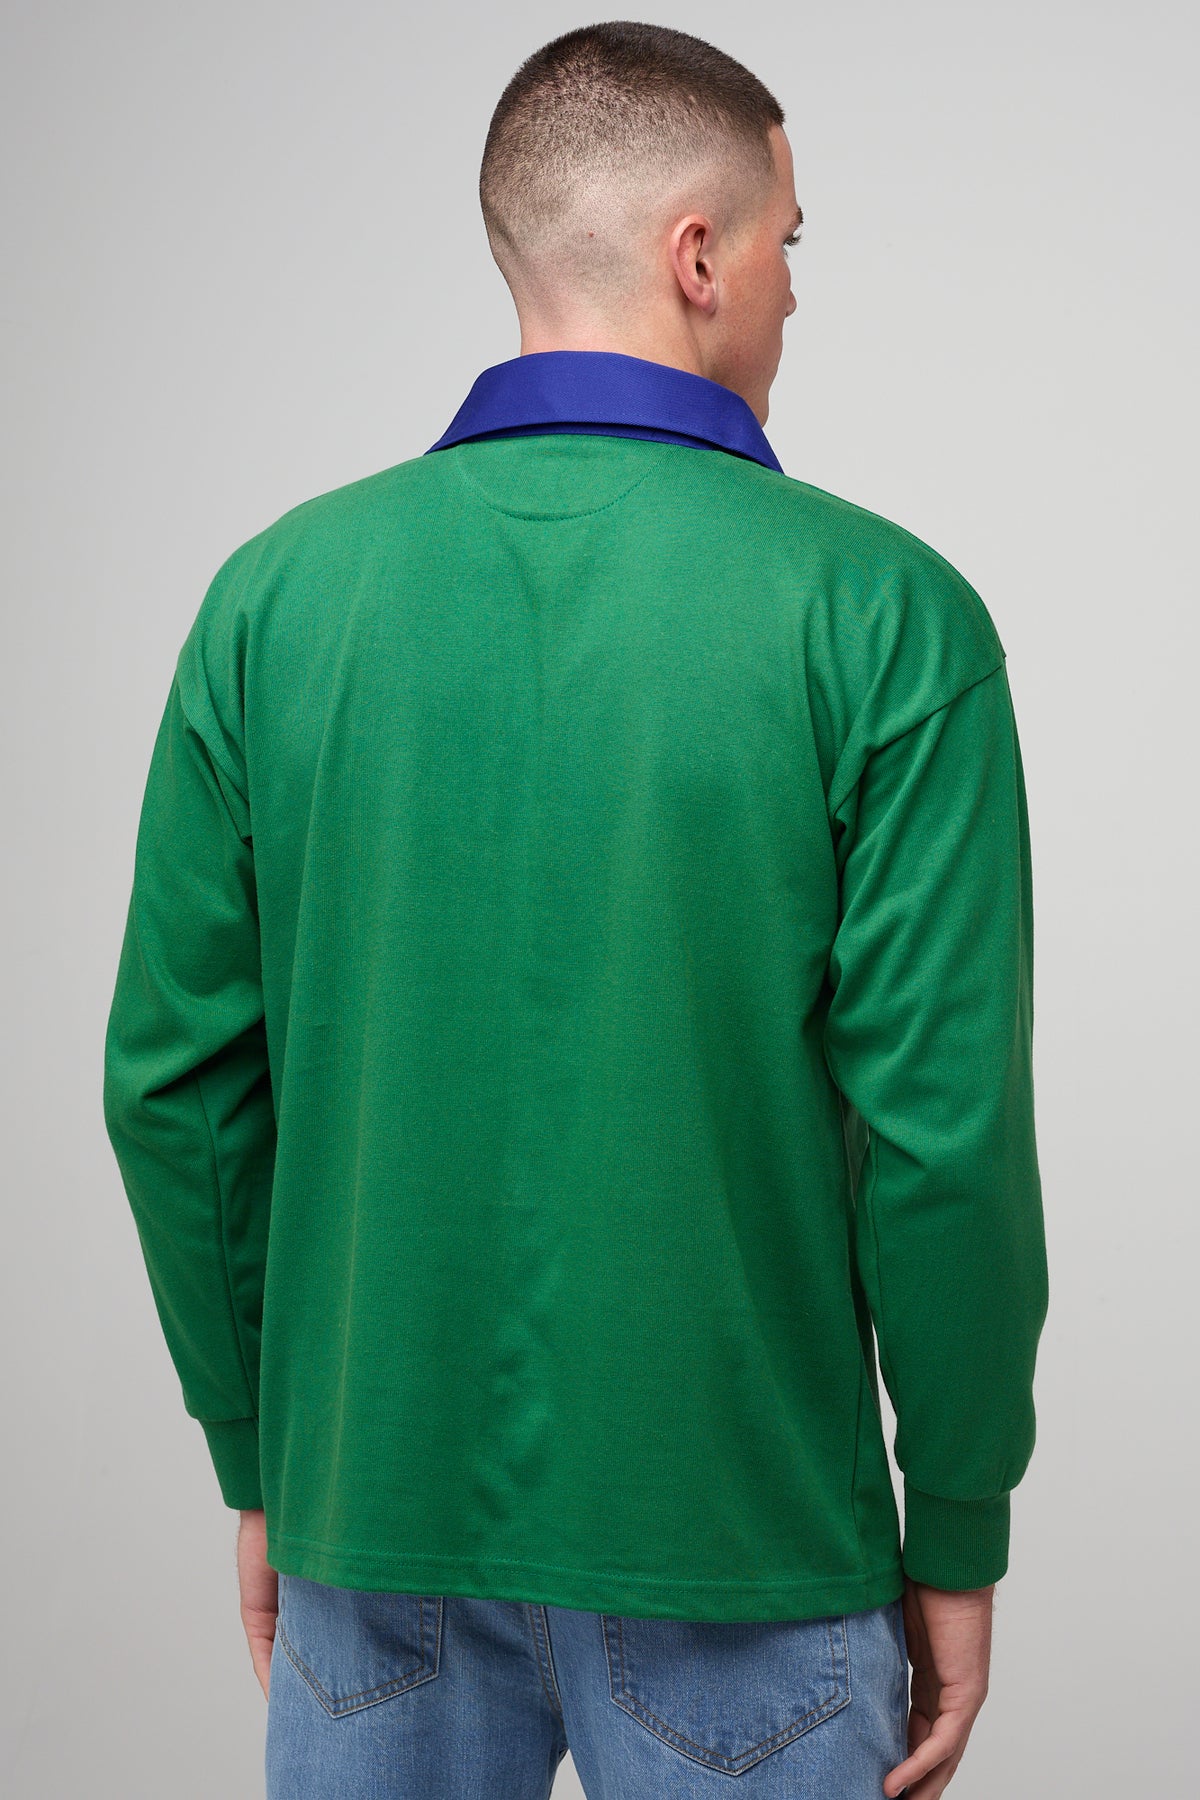 
            White, brunette male, facing away wearing green rugby shirt with contrast blue collar, 